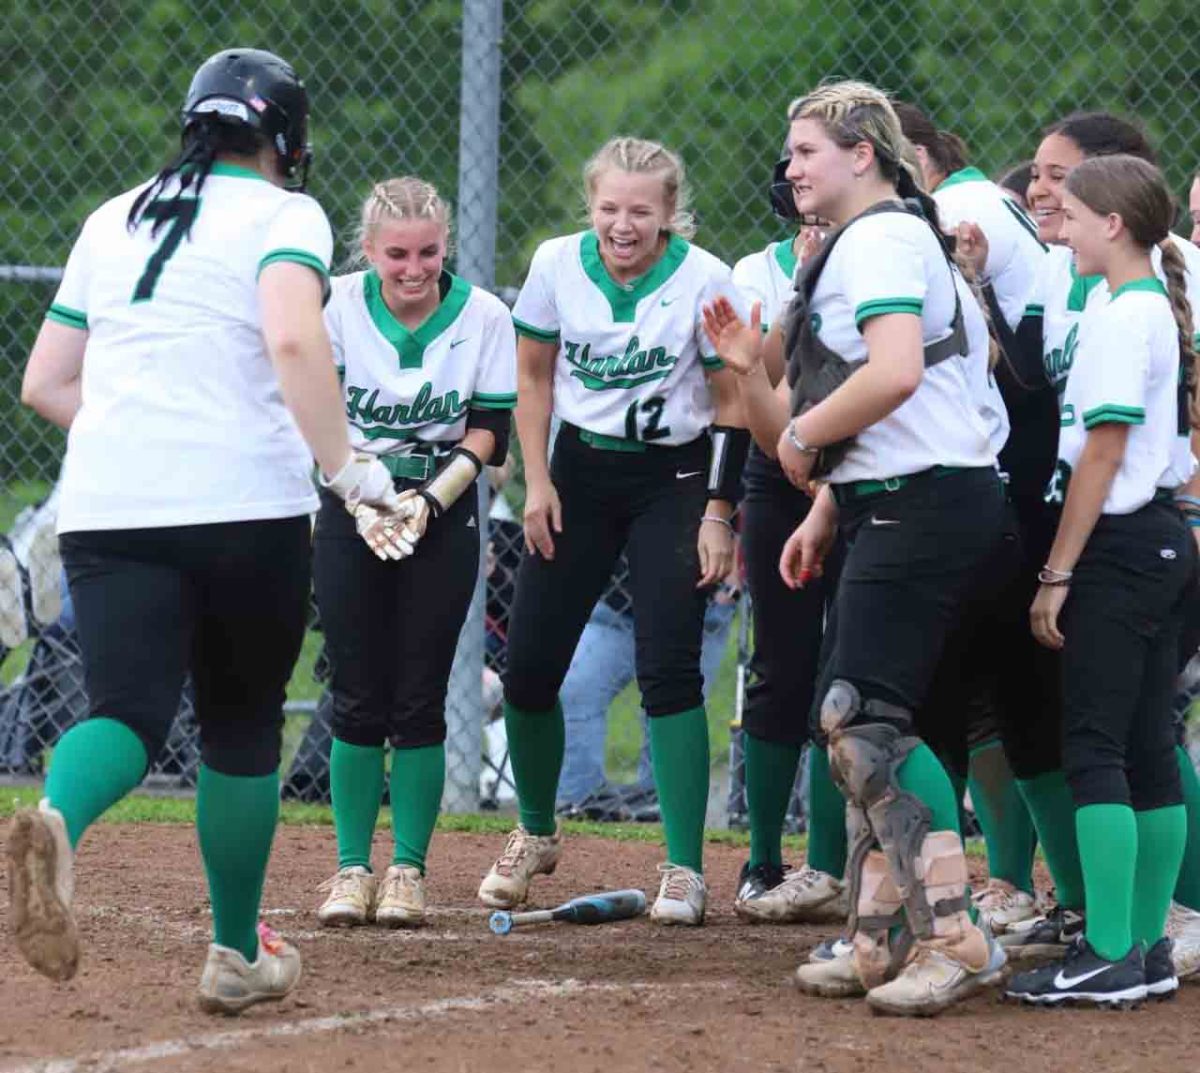 Harlans Abbi Fields was greeted at the plate after her sixth-inning homer in the Lady Dragons 12-8 win over Harlan County.